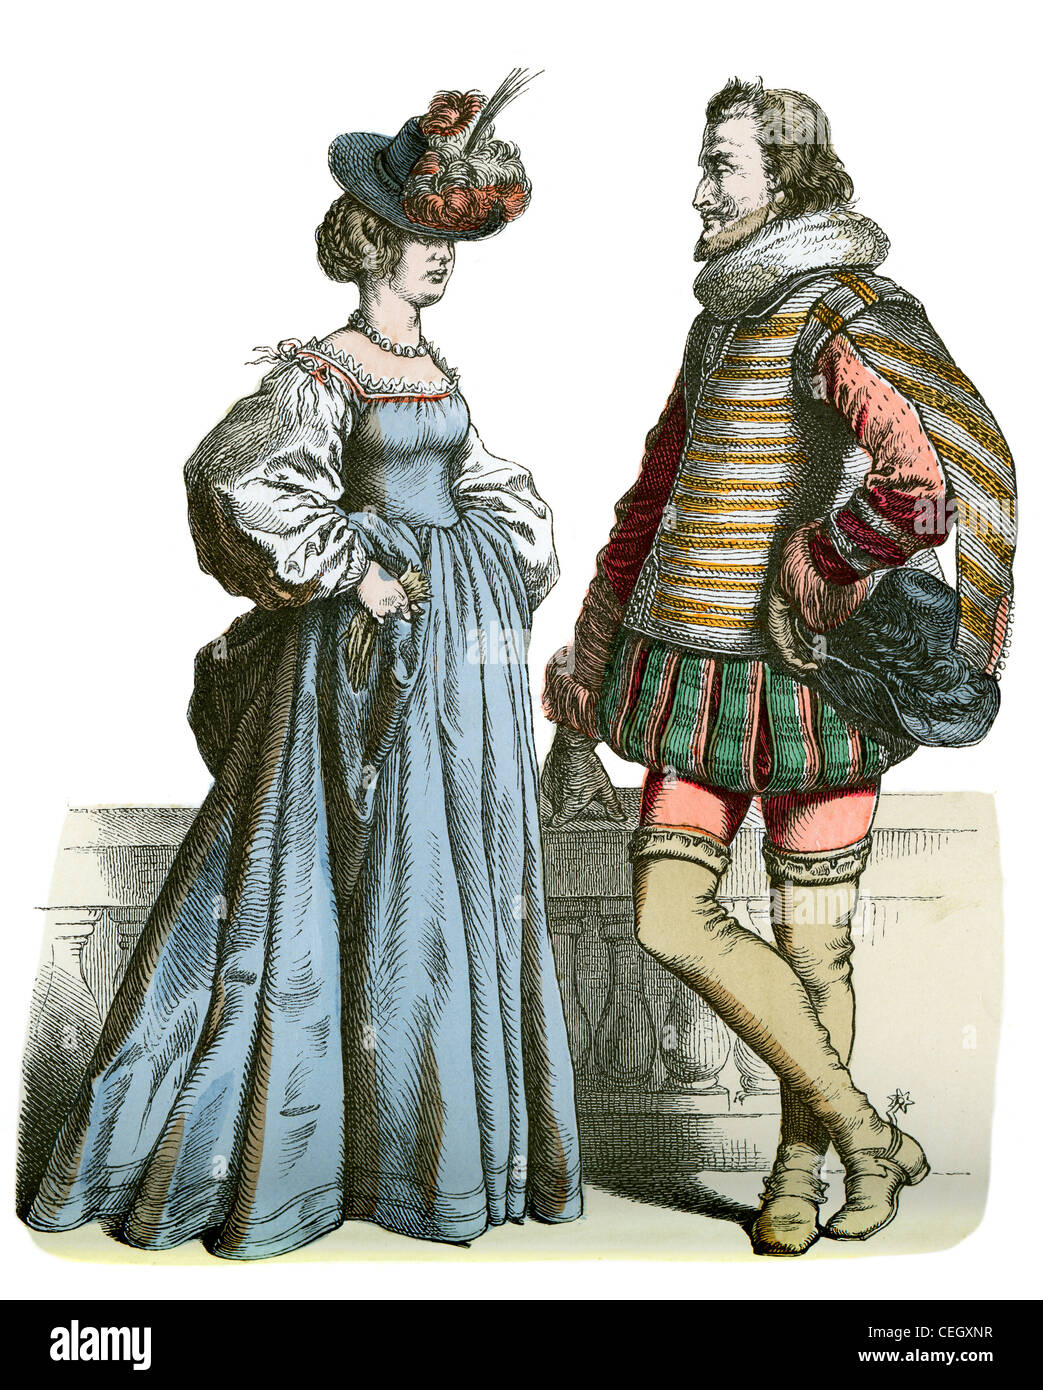 A noble man and woman in the fashion of the 17th century Stock Photo